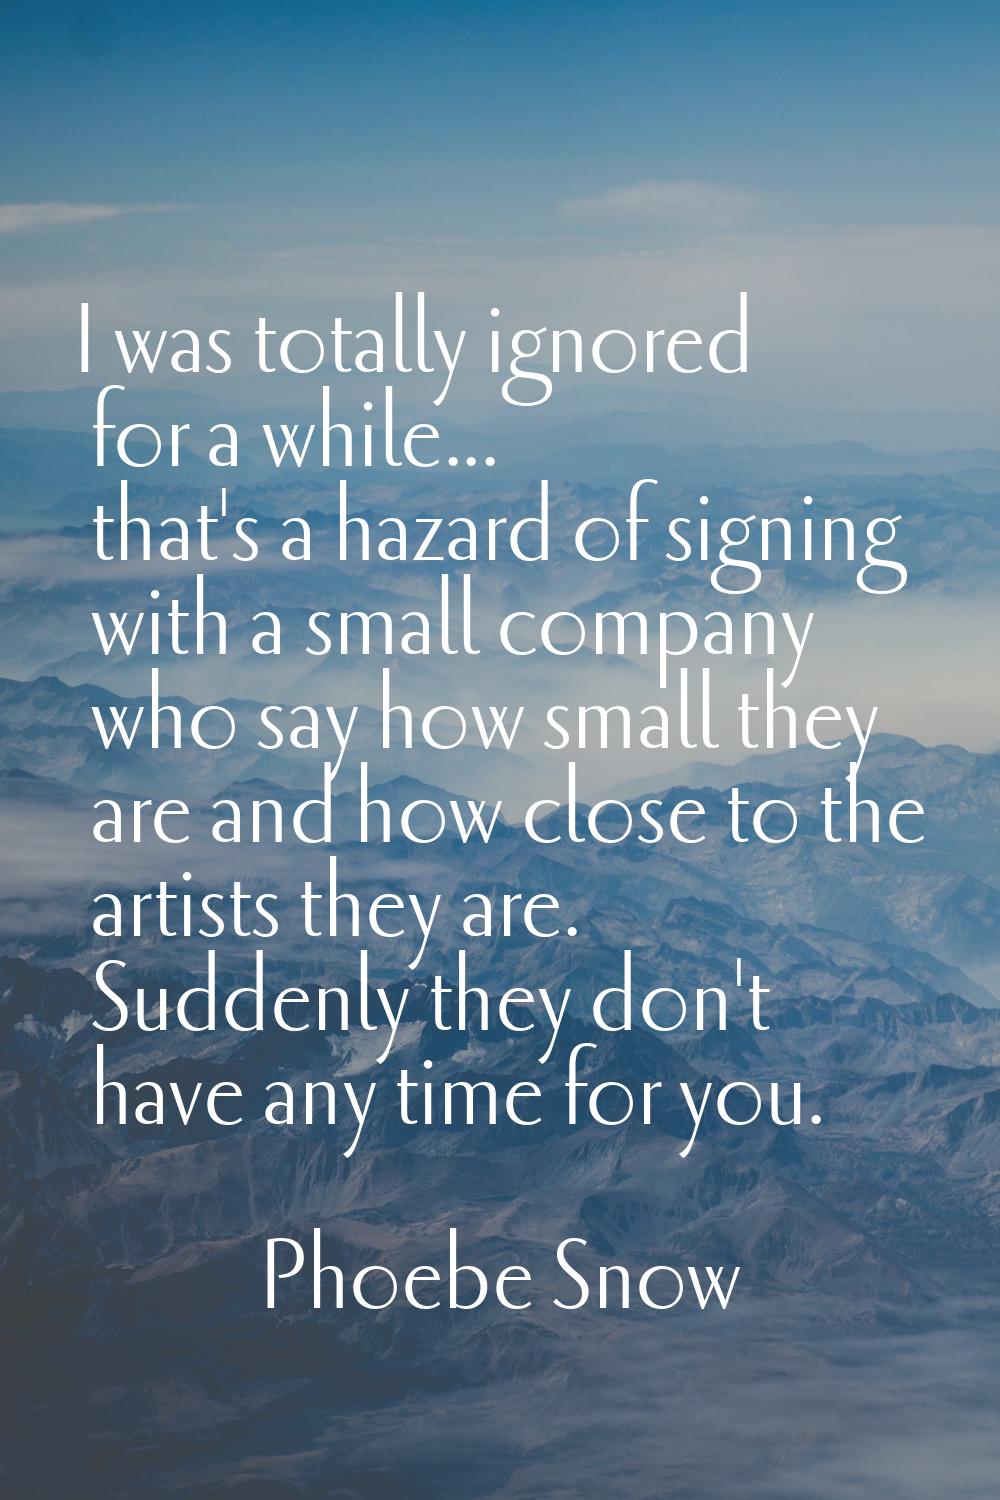 I was totally ignored for a while... that's a hazard of signing with a small company who say how sm